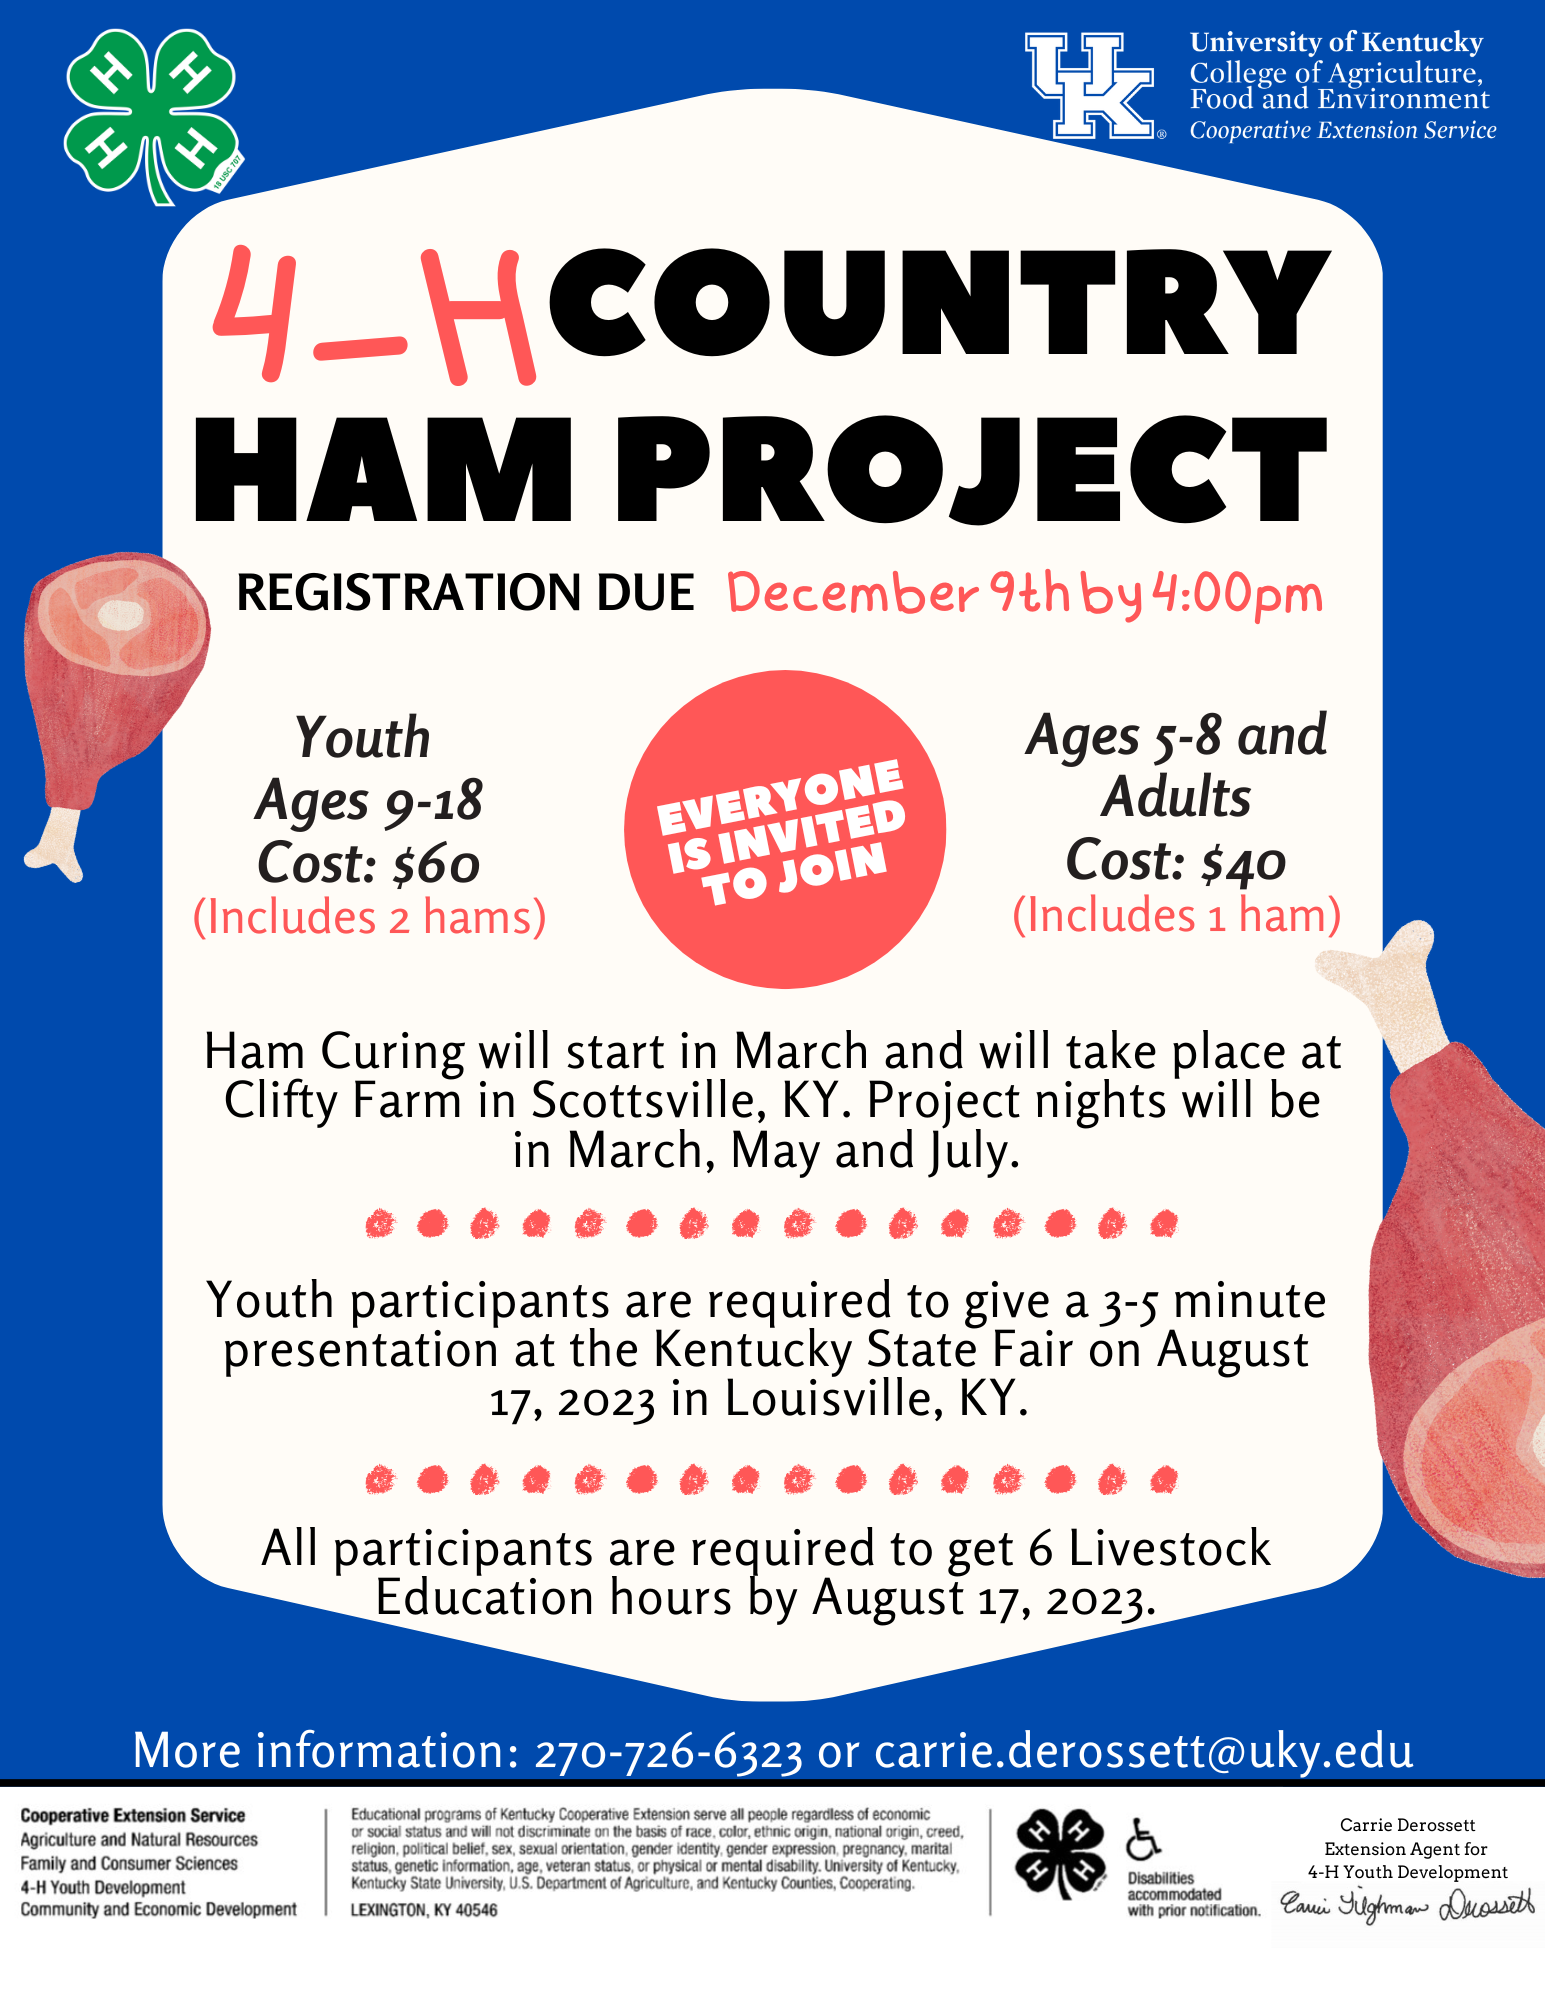 Country ham project